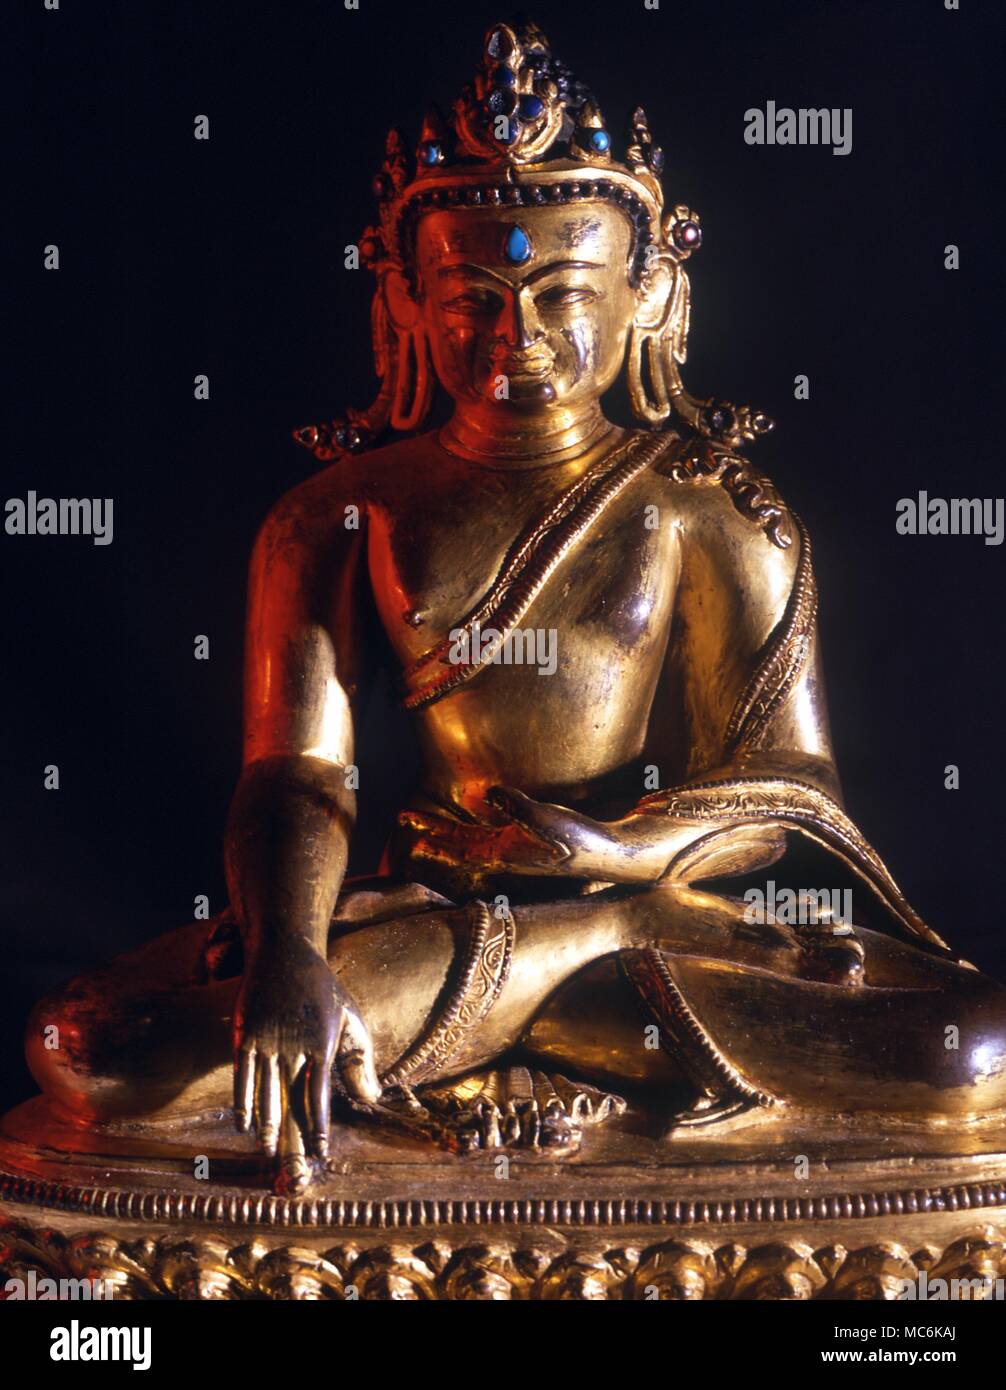 Sakyamuni Buddha in classical earth touching mudra. The third eye suggests that he is a celestial form rather than the historical Gautama Stock Photo